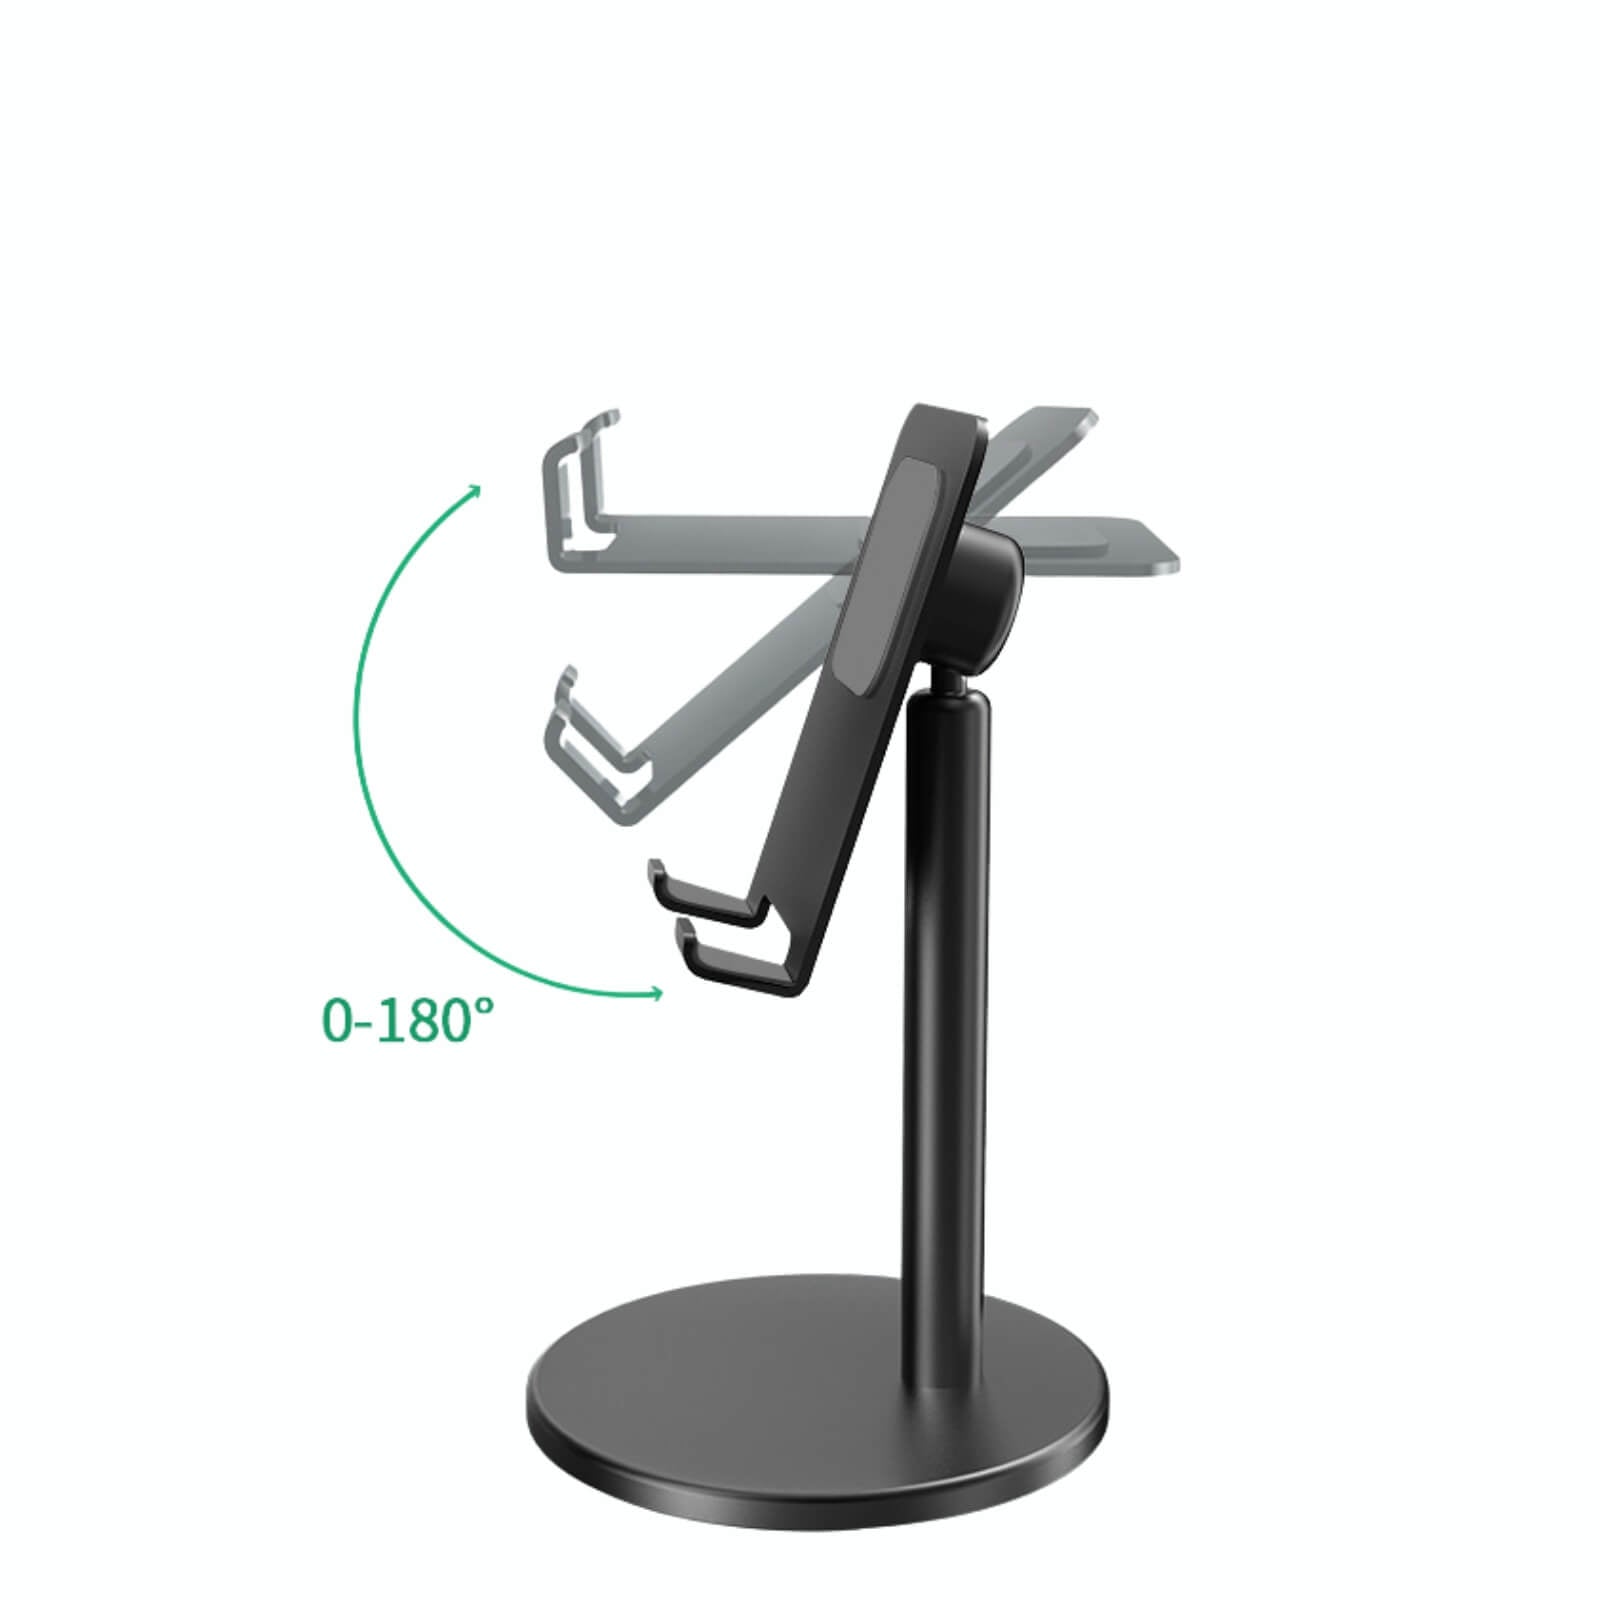 Adjustable-Phone-holder-up and down 180°